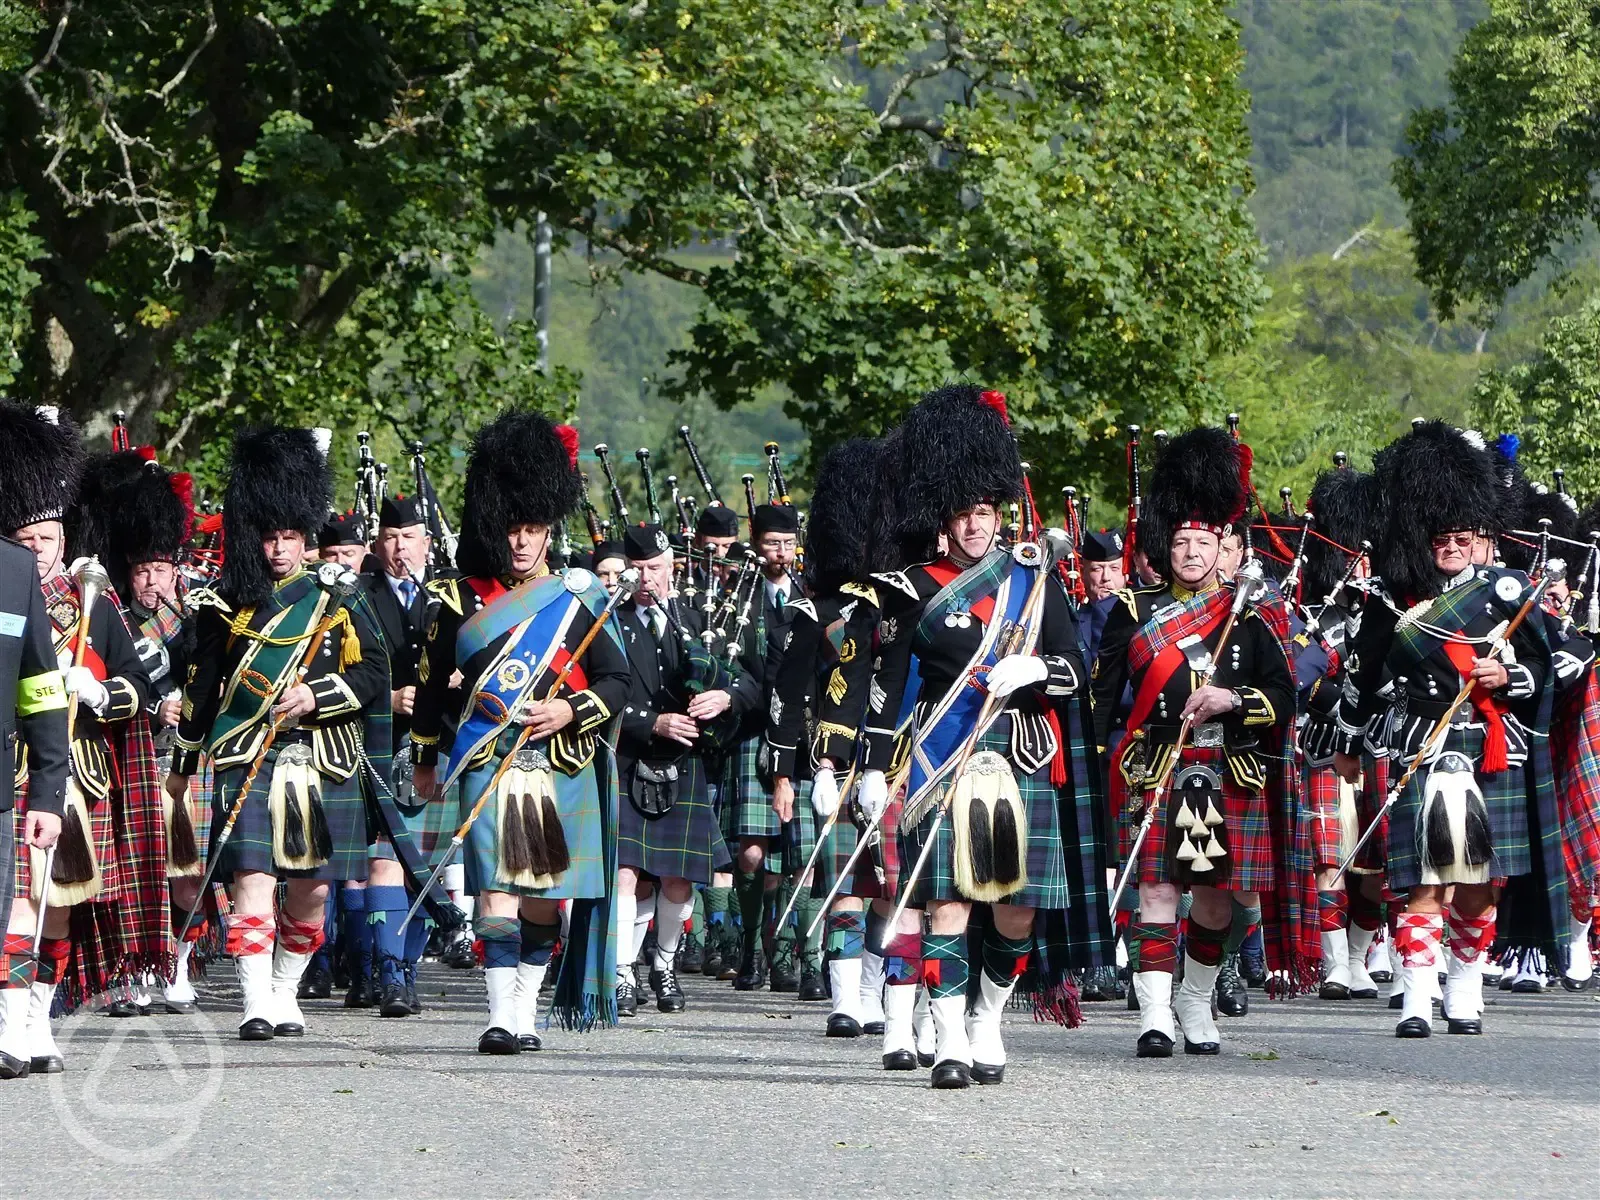 Pipers during the Braemar gathering.